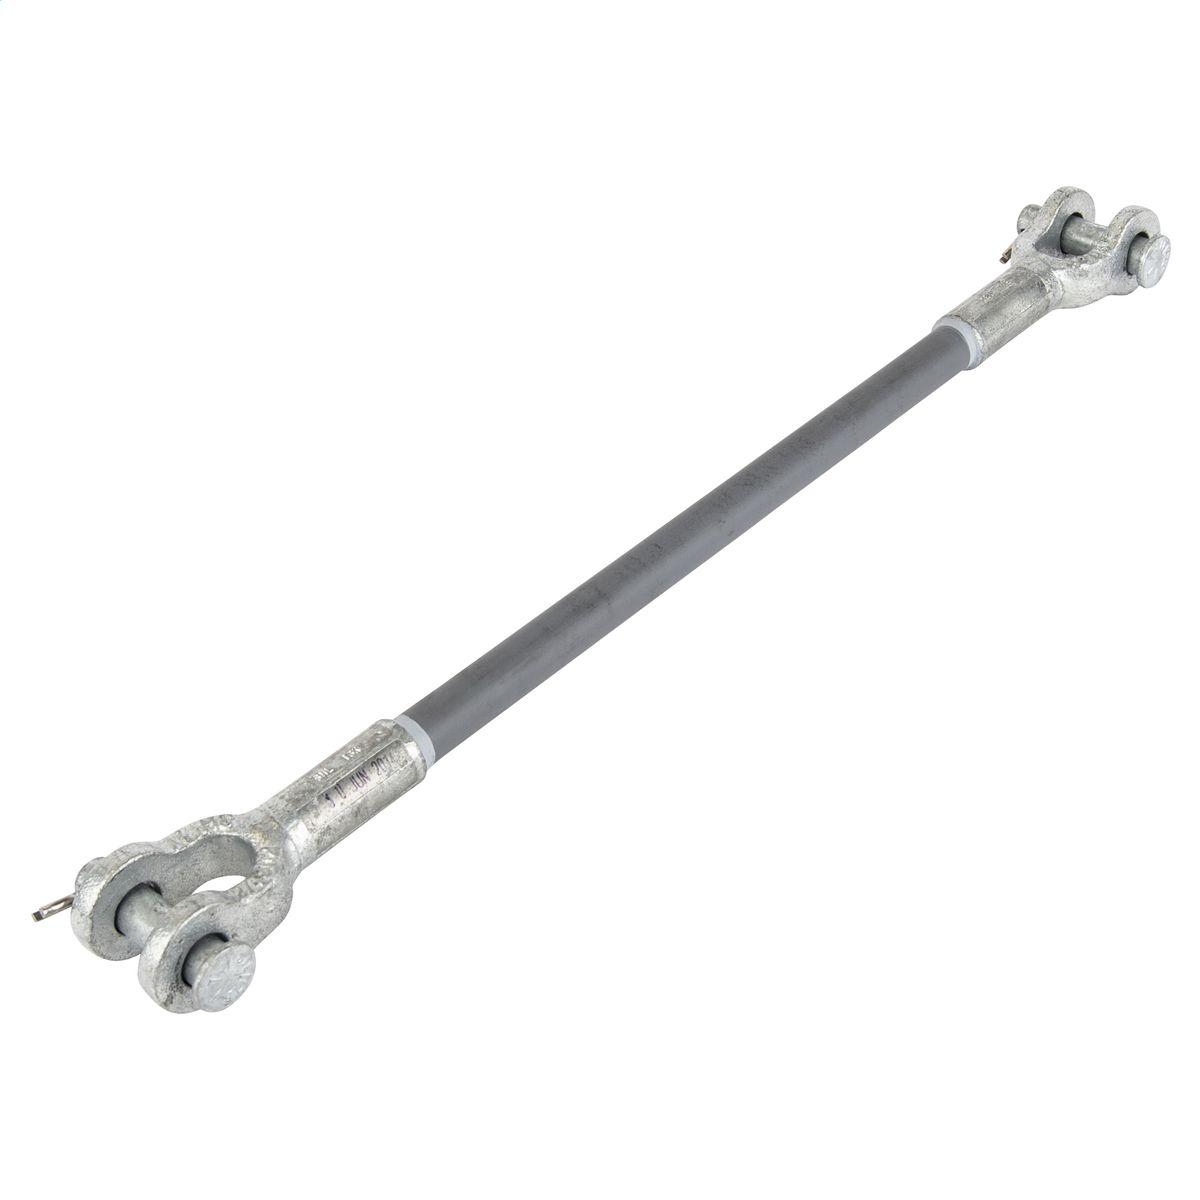 Hubbell GS36078CCSC 78" Silicone Coated Fiberglass Guy Strain; 36,000 lb Series; Clevis / Clevis 